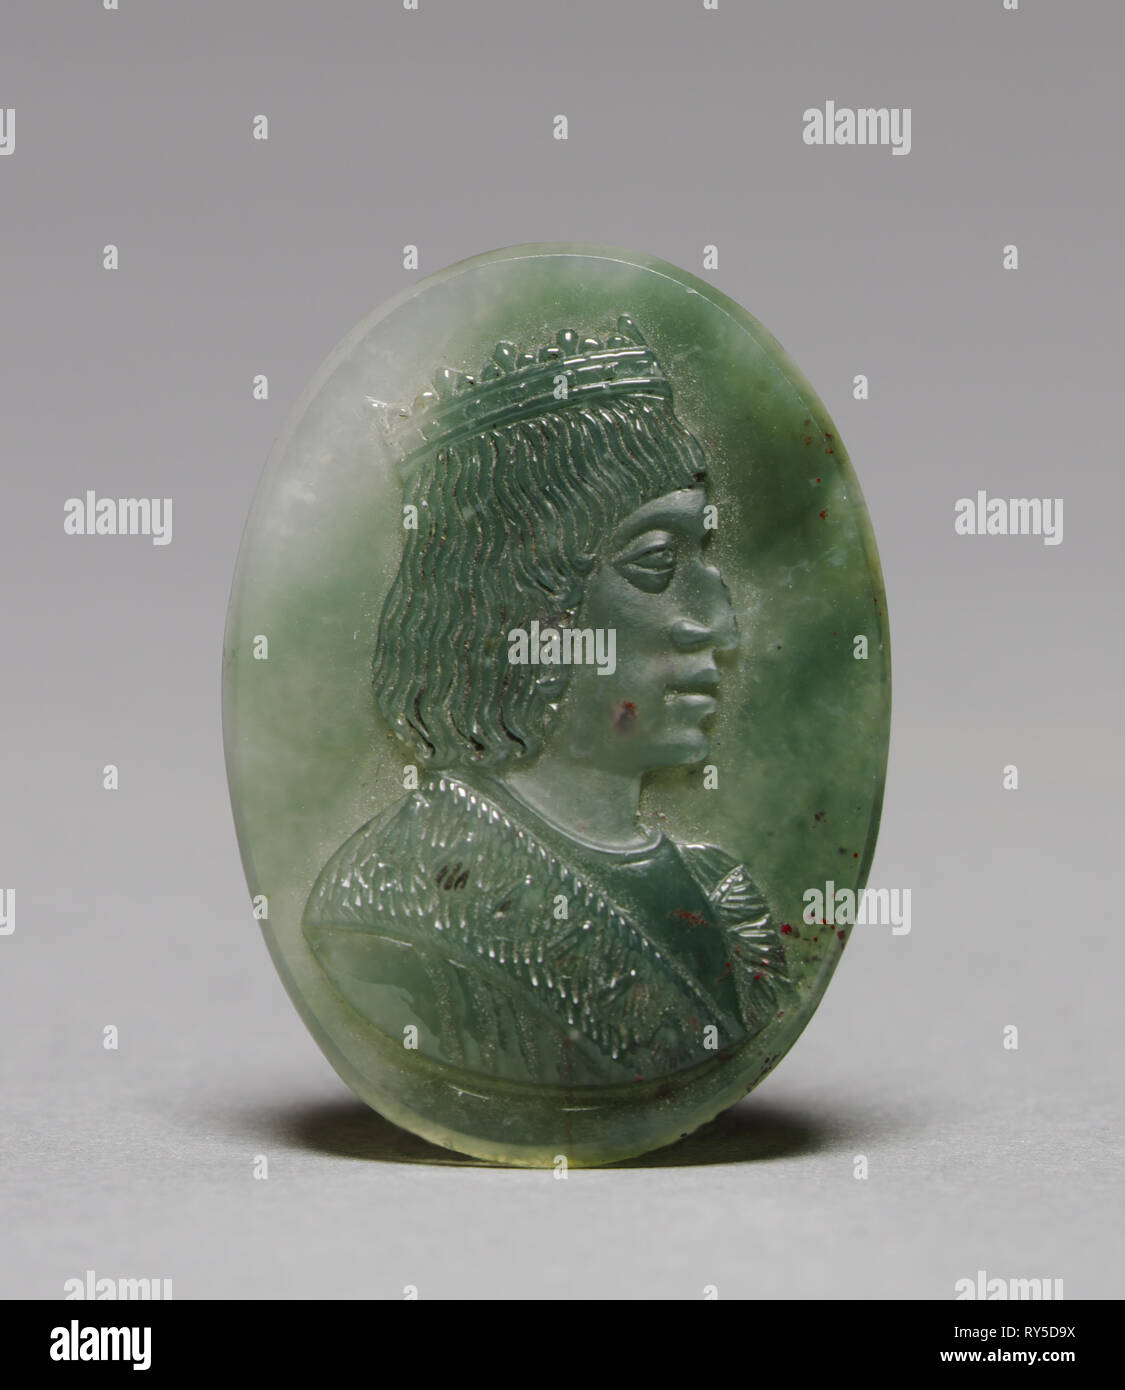 Cameo of King Charles VIII of France (1470-1498), c. 1494. France, Lyon, 15th century. Agate; overall: 3.4 x 2.4 x 0.4 cm (1 5/16 x 15/16 x 3/16 in Stock Photo